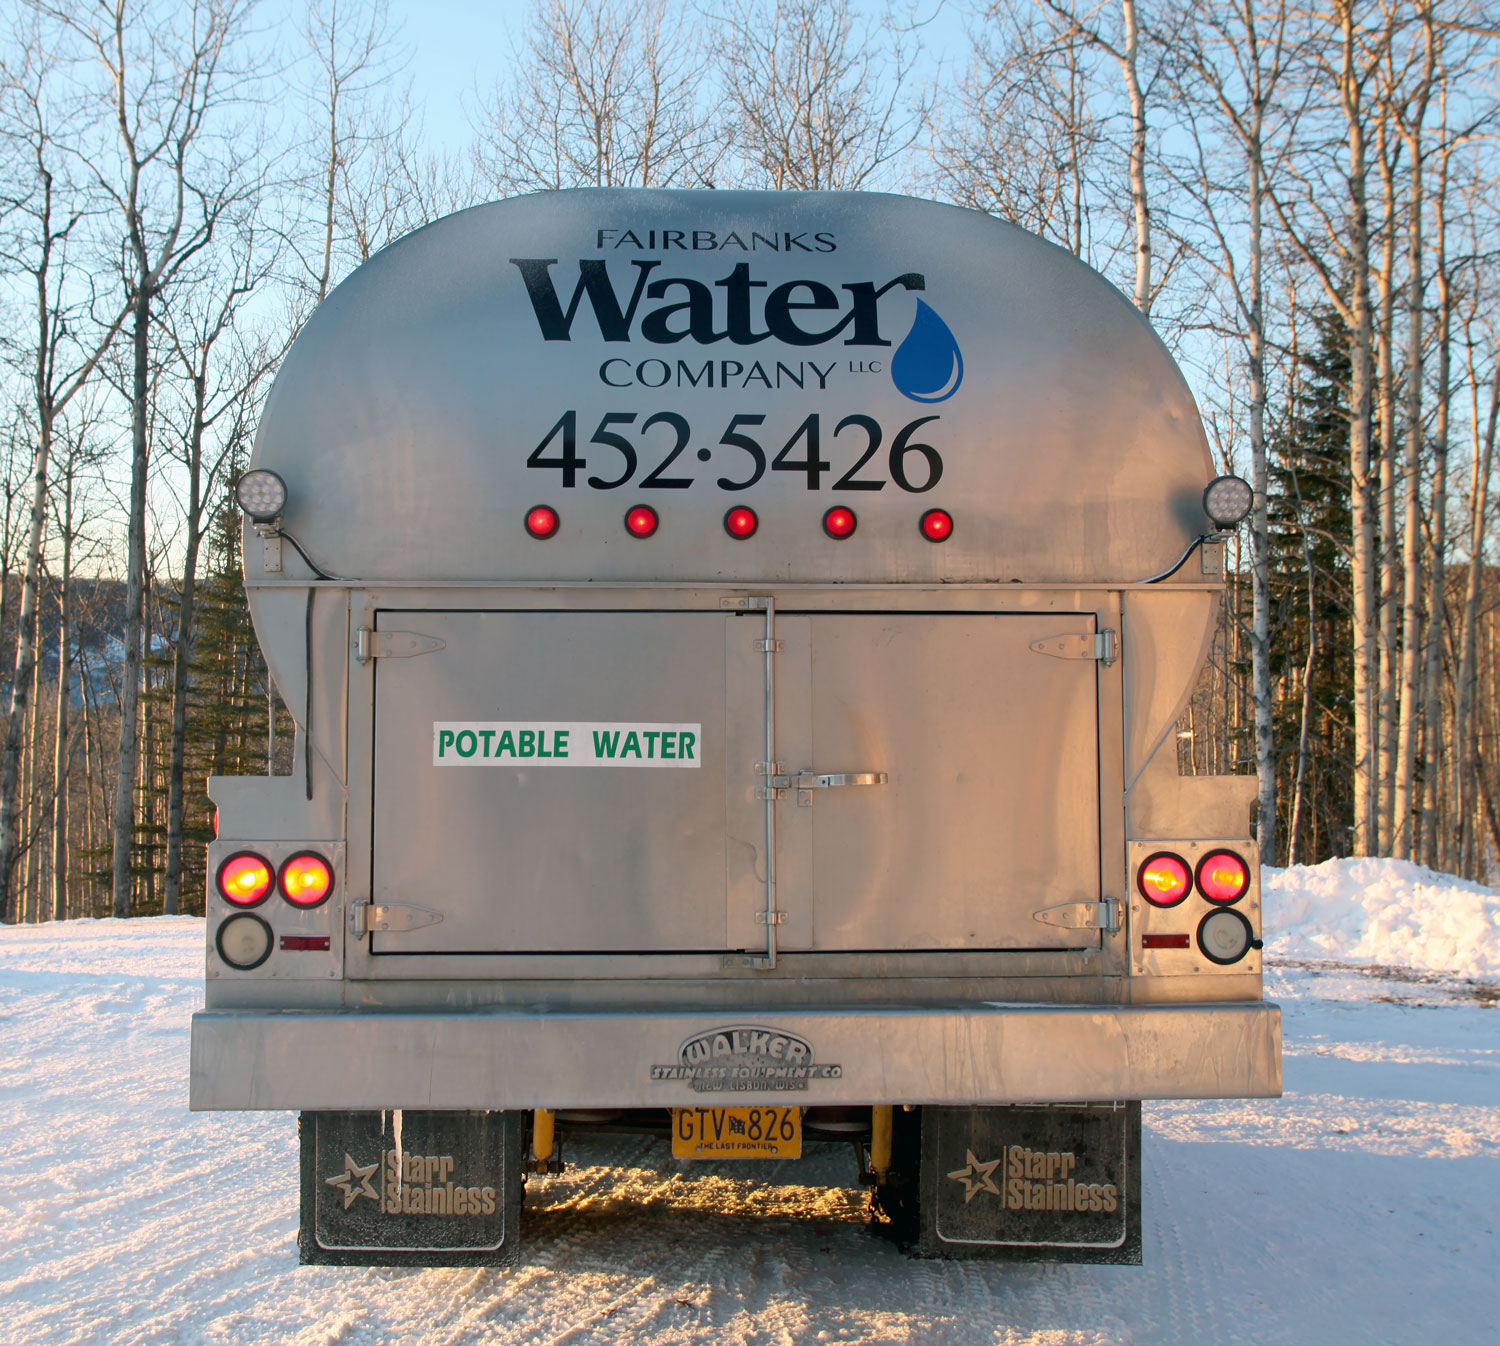 Fairbanks Water Co. delivery truck pulling away